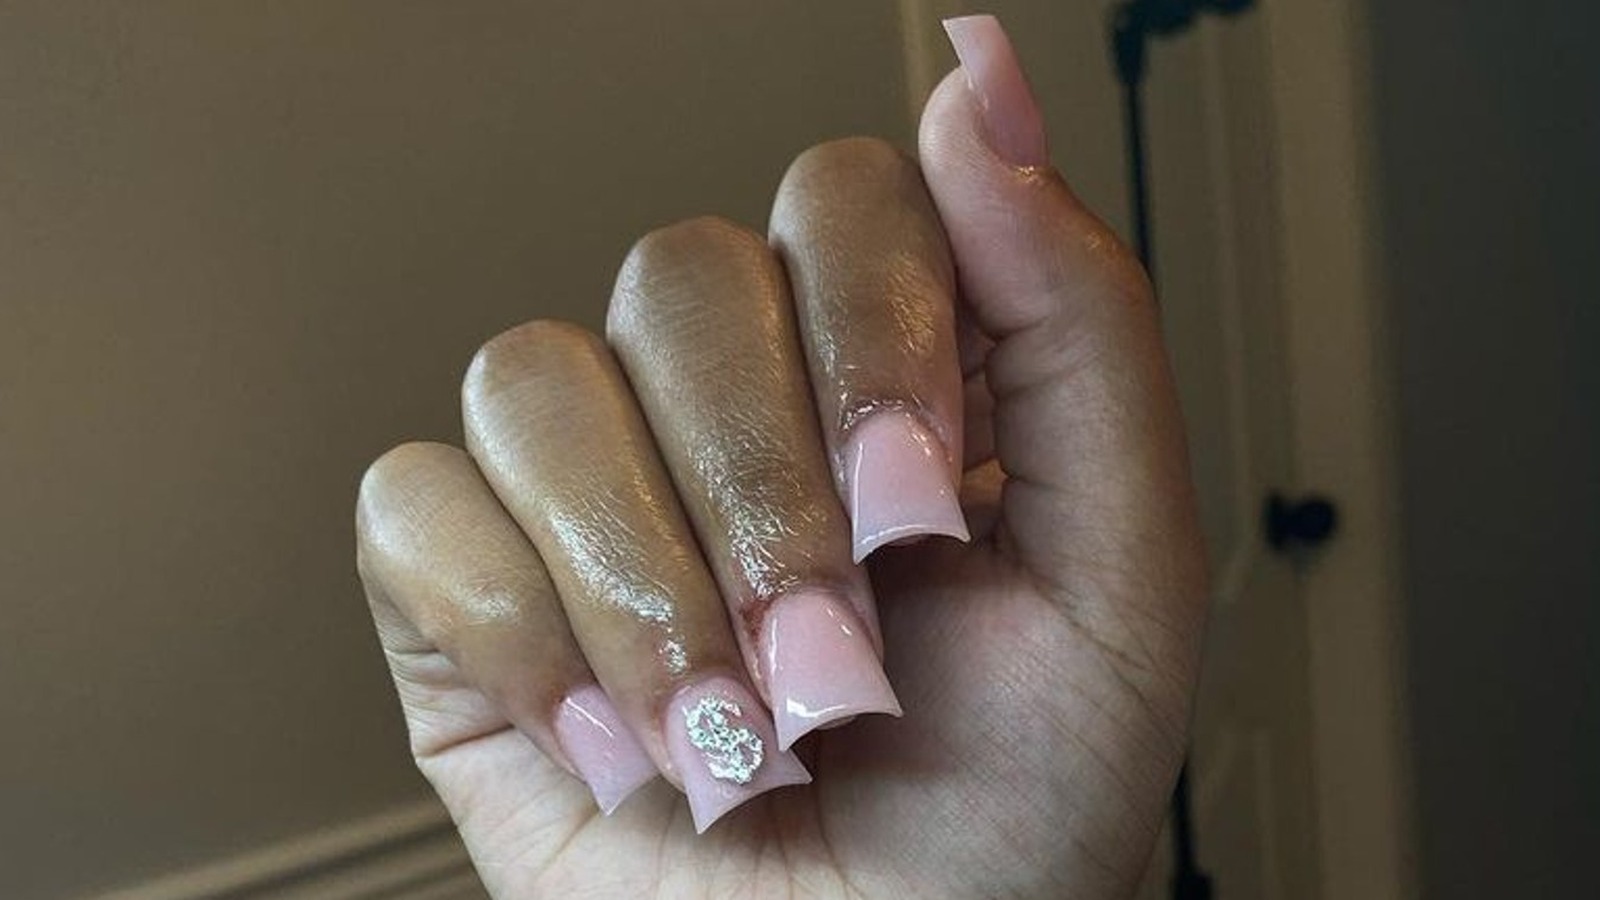 Details more than 144 fan shaped nails